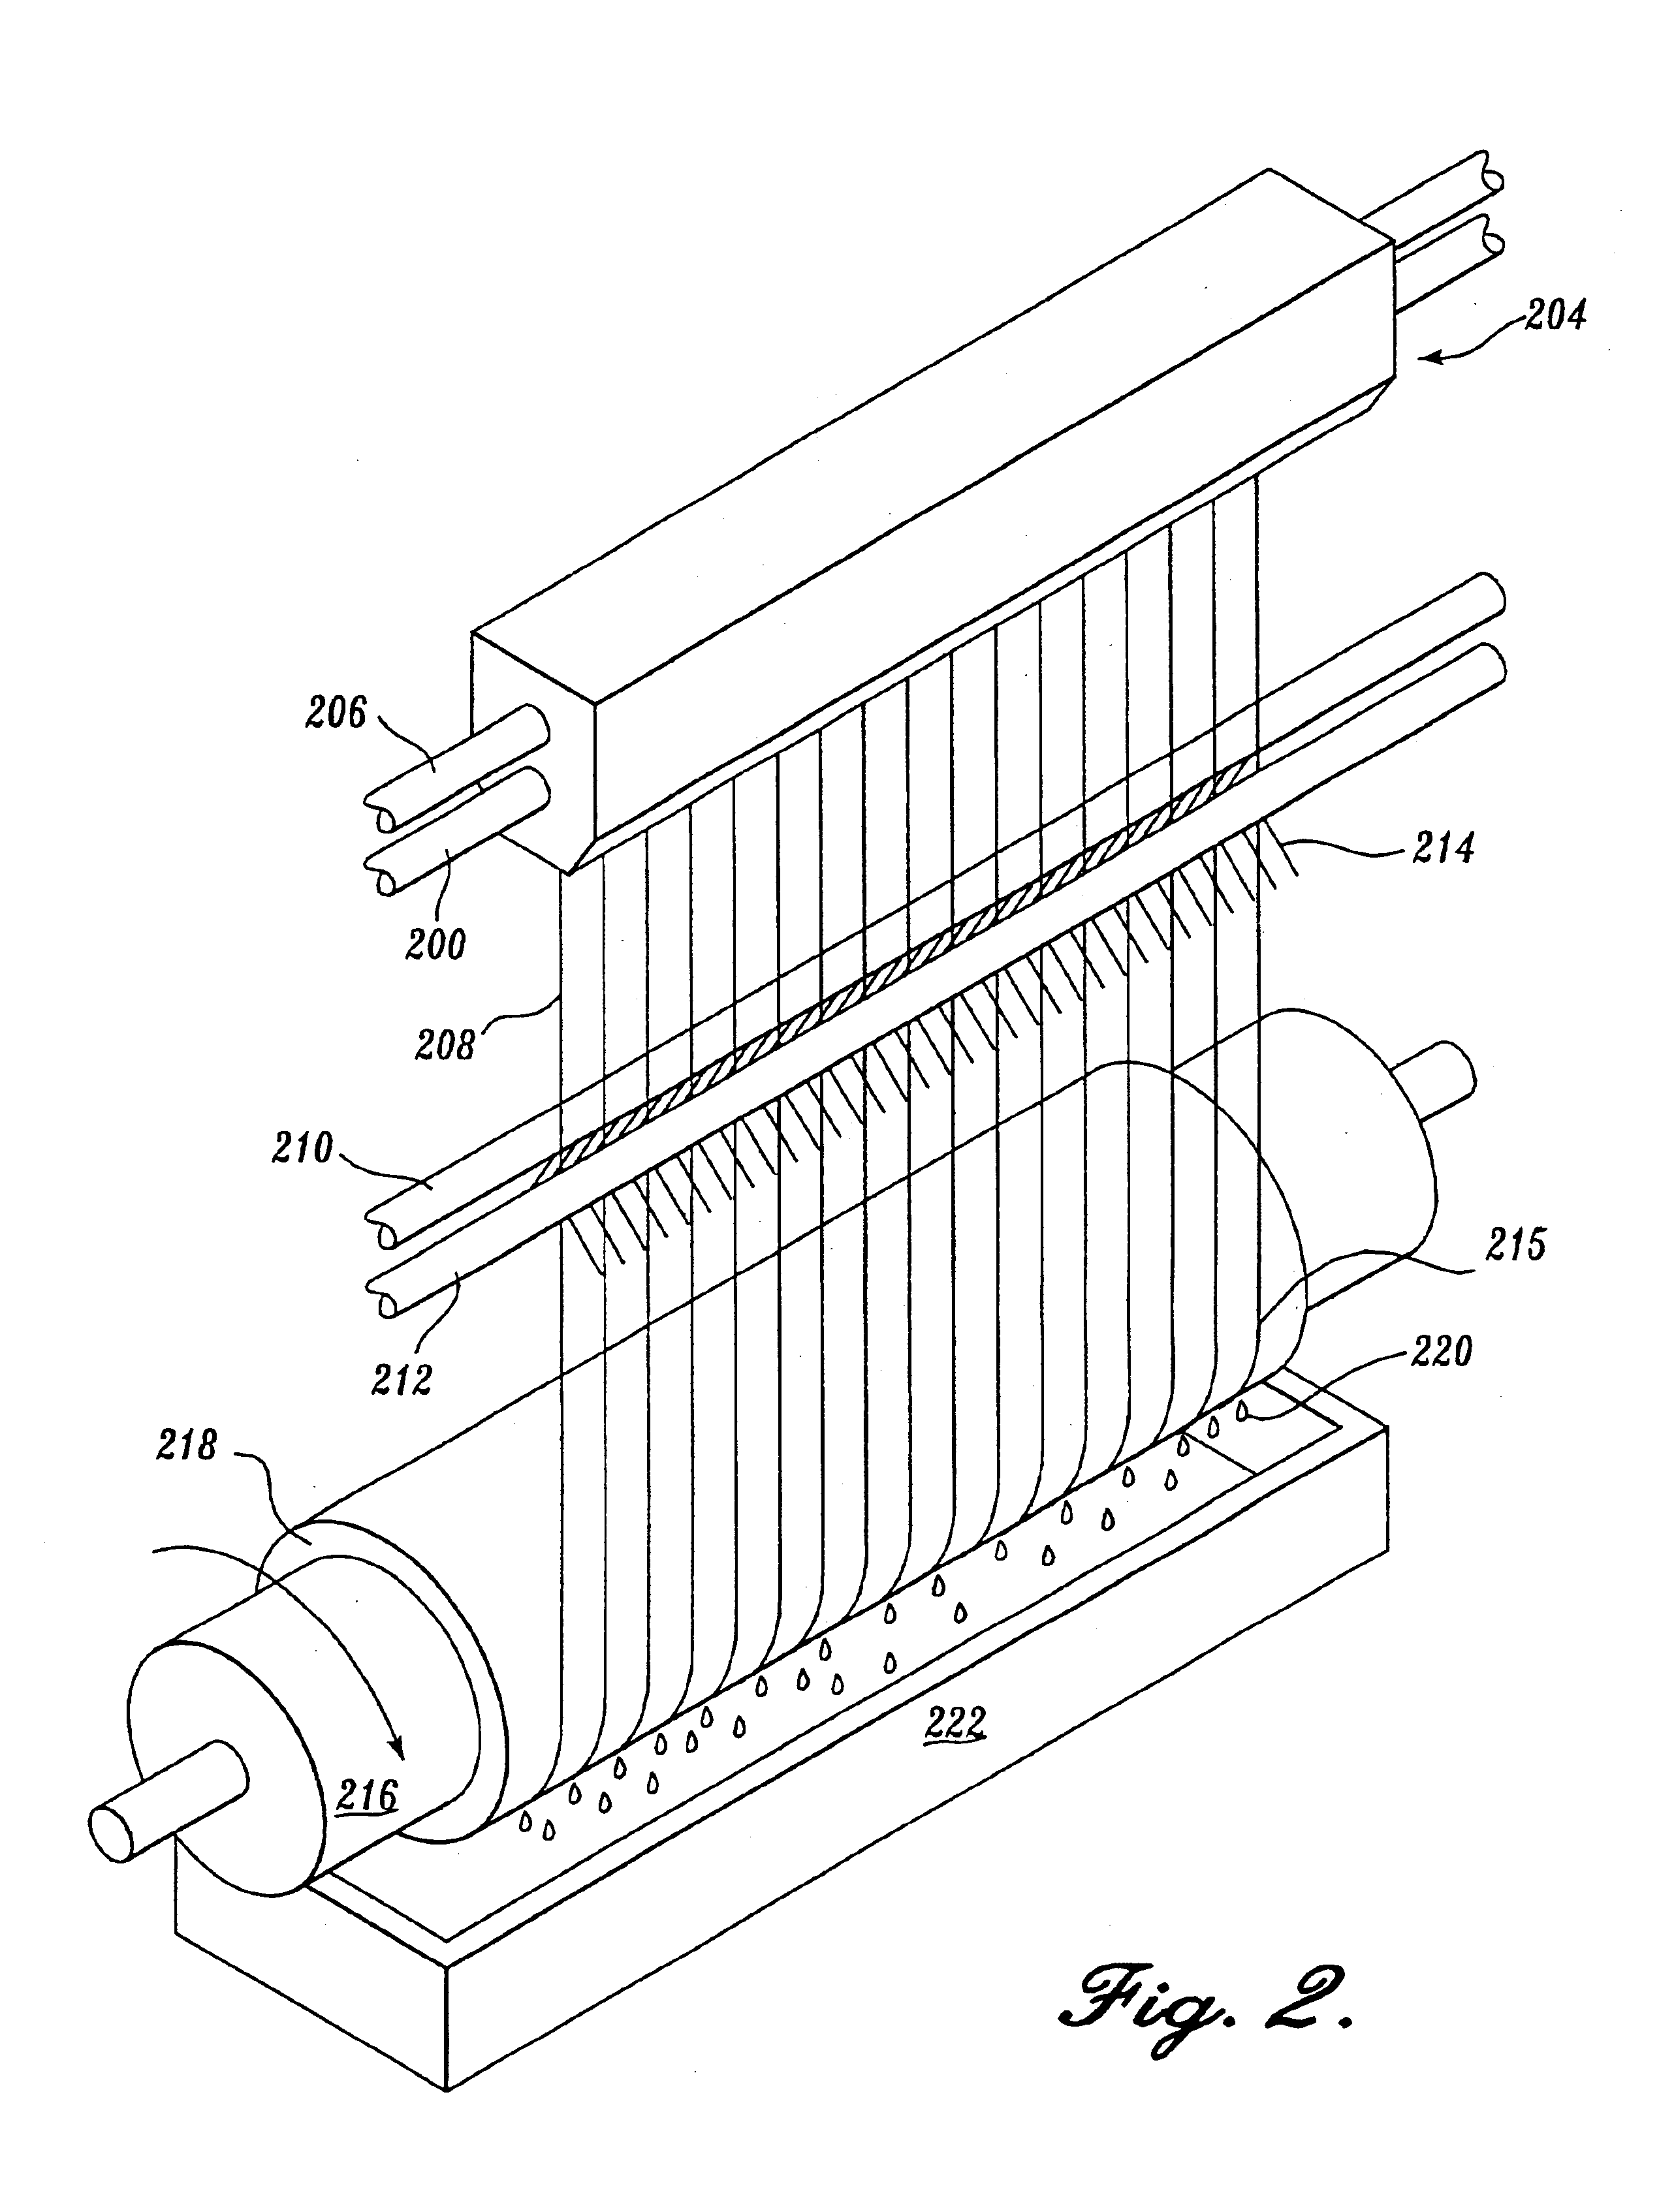 Meltblown process with mechanical attenuation